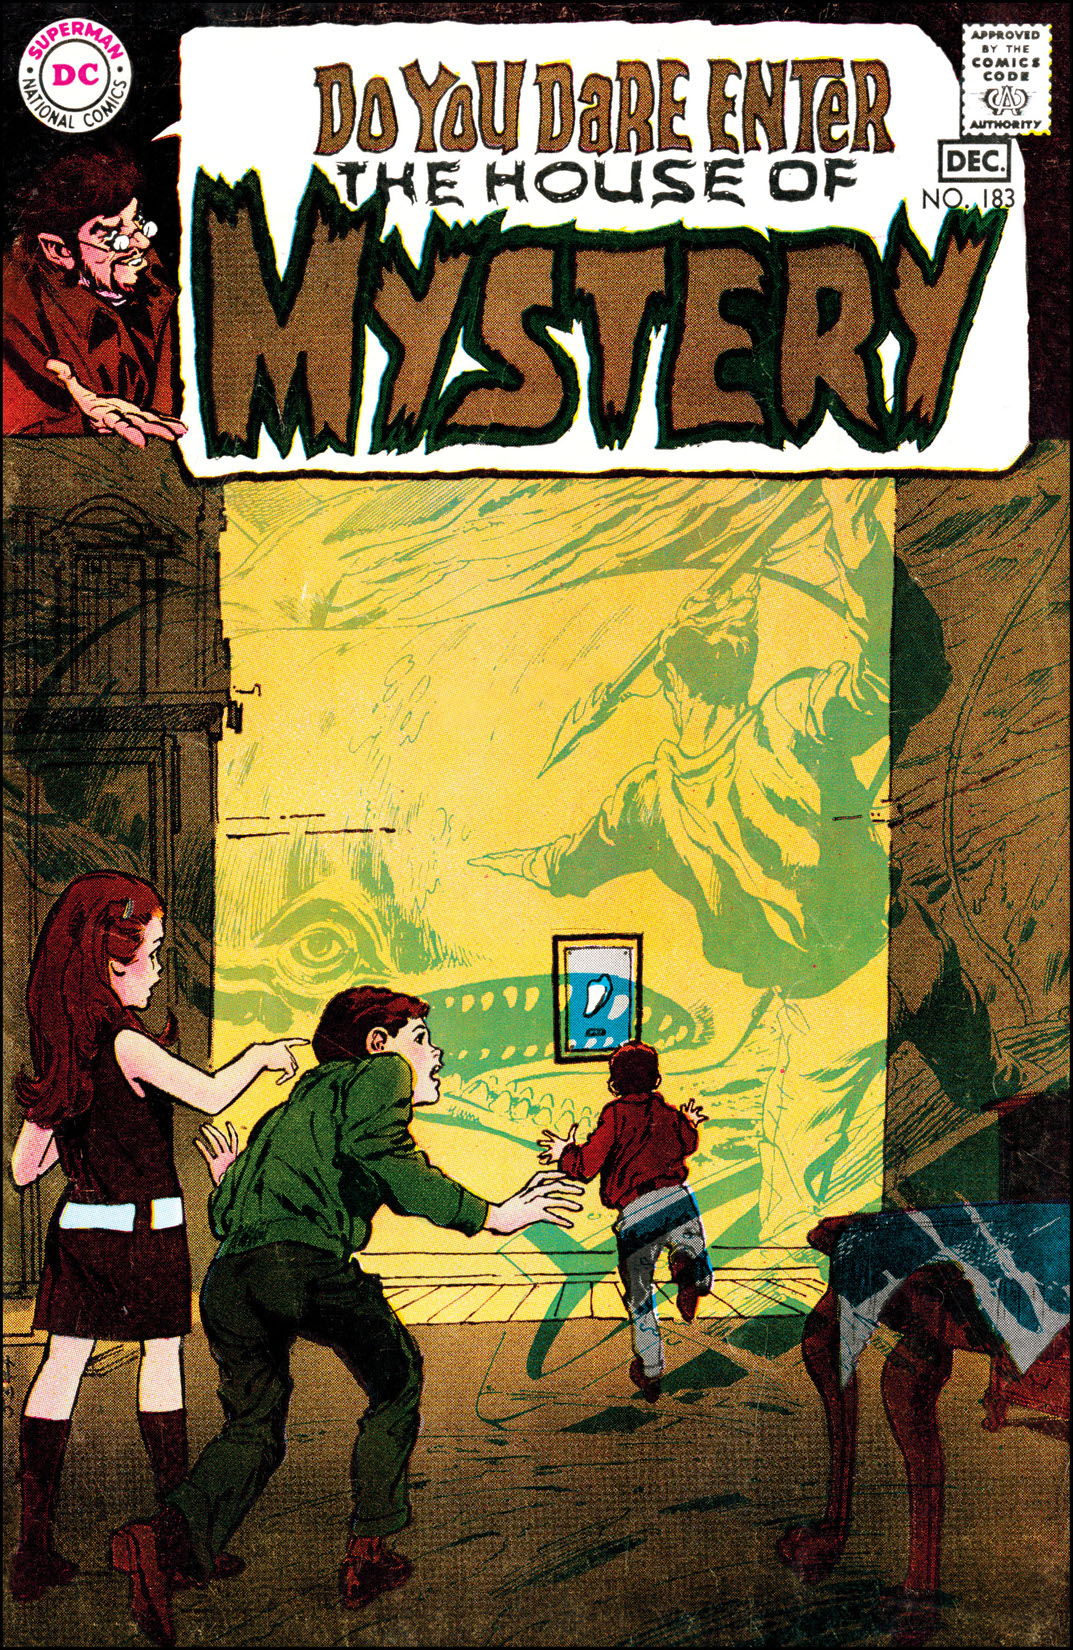 House of Mystery (1951-) #183 preview images